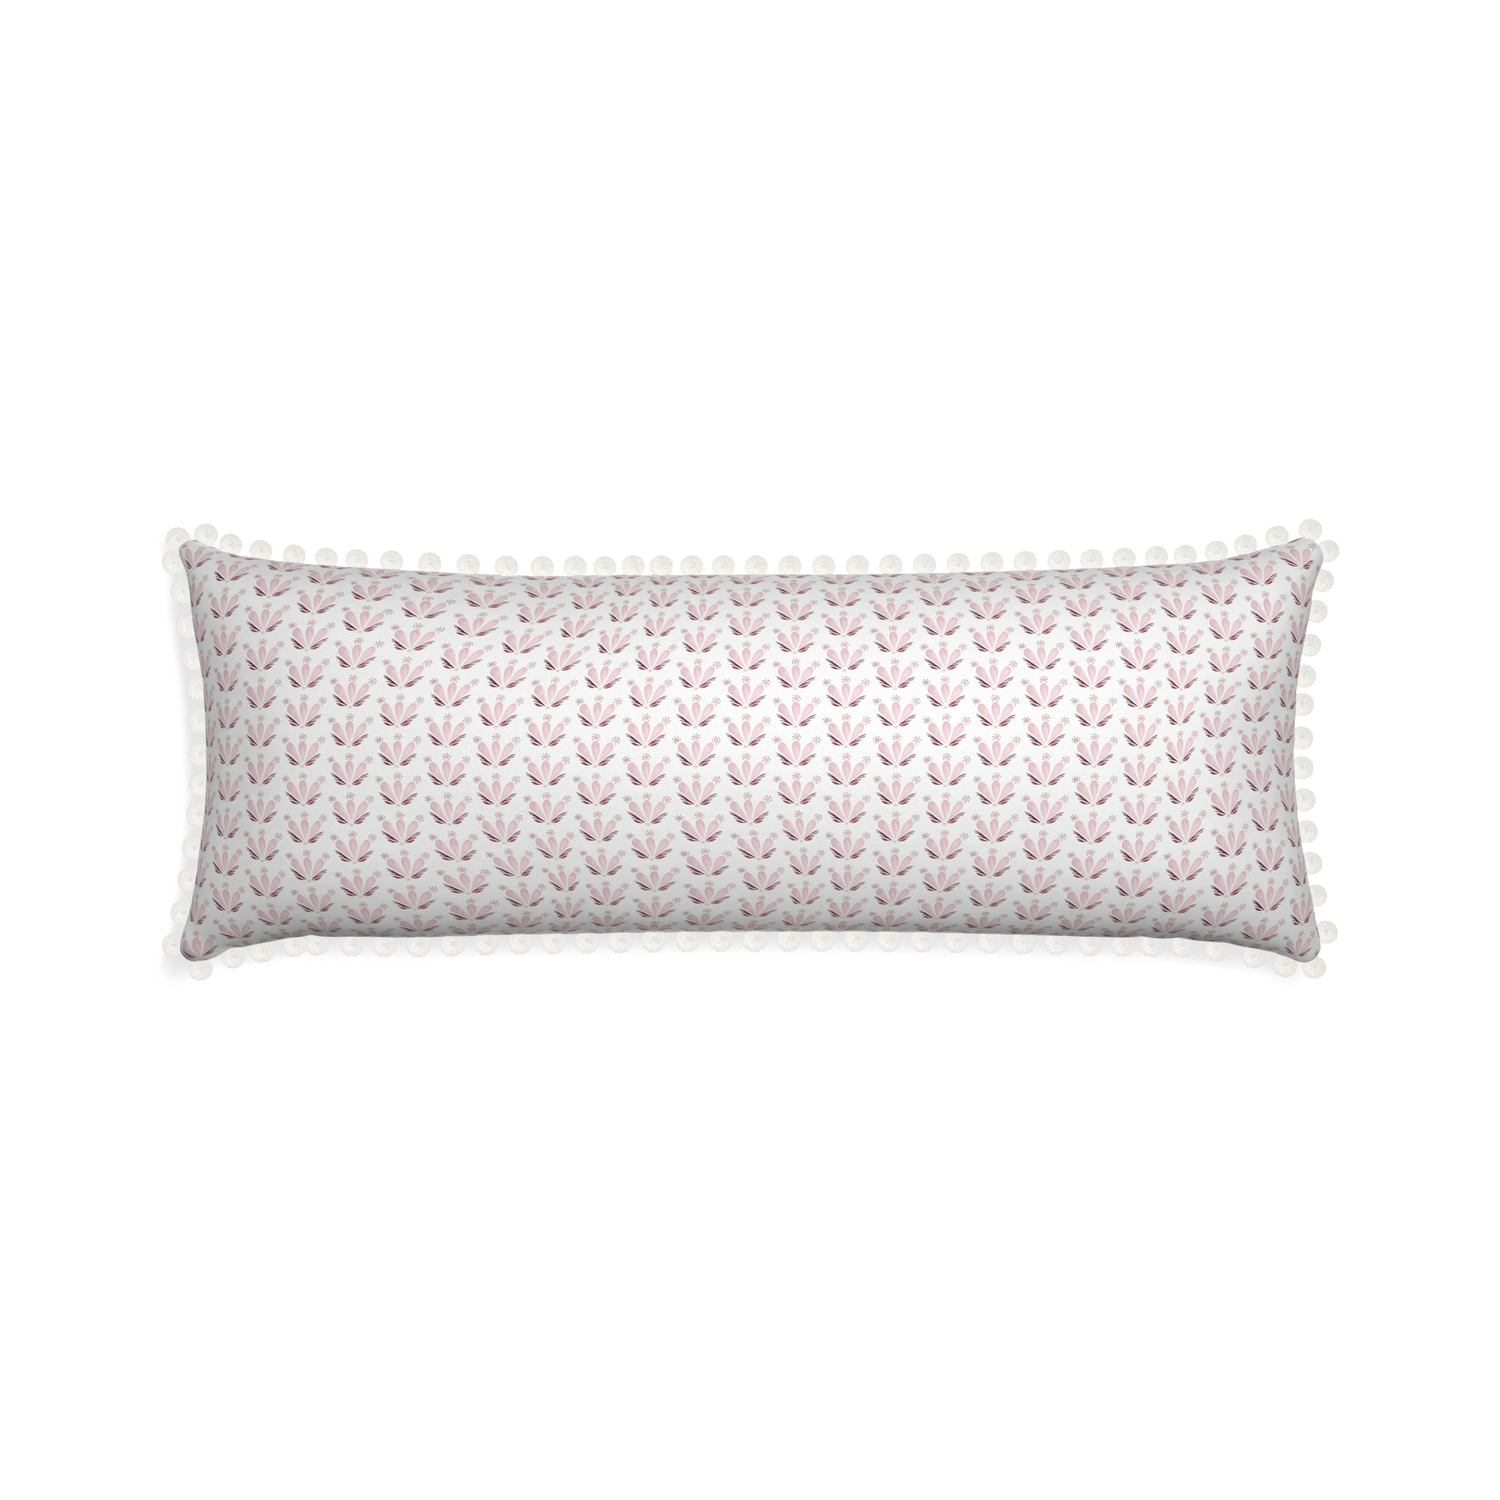 Xl-lumbar serena pink custom pink & burgundy drop repeat floralpillow with snow pom pom on white background